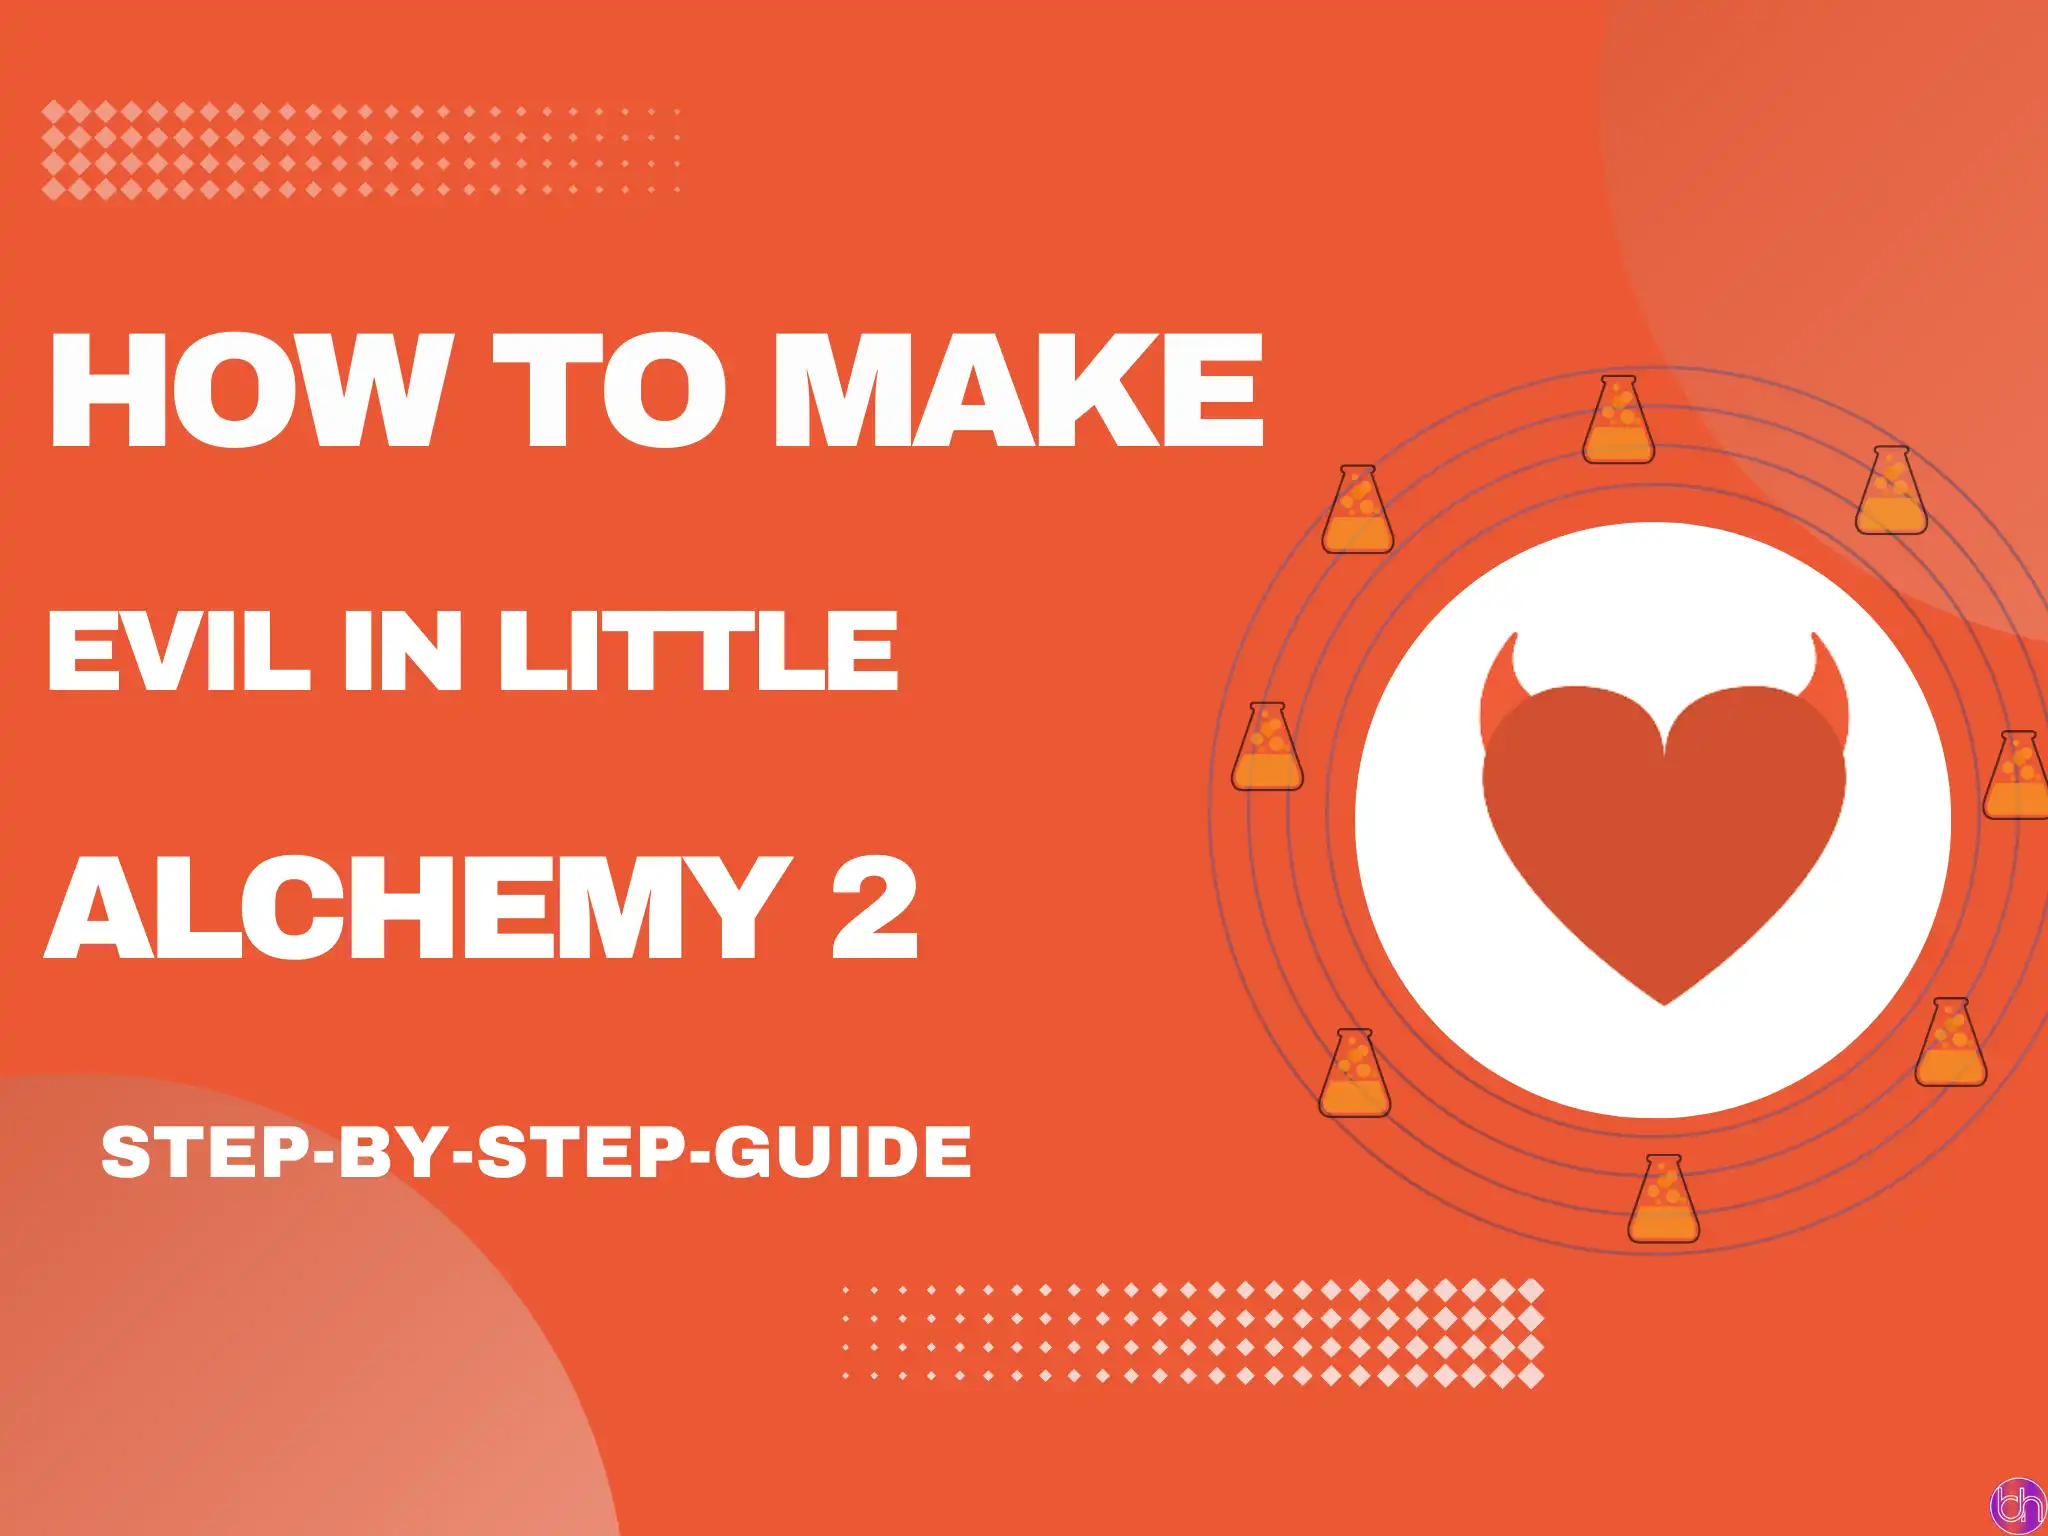 How to make Evil in Little Alchemy 2